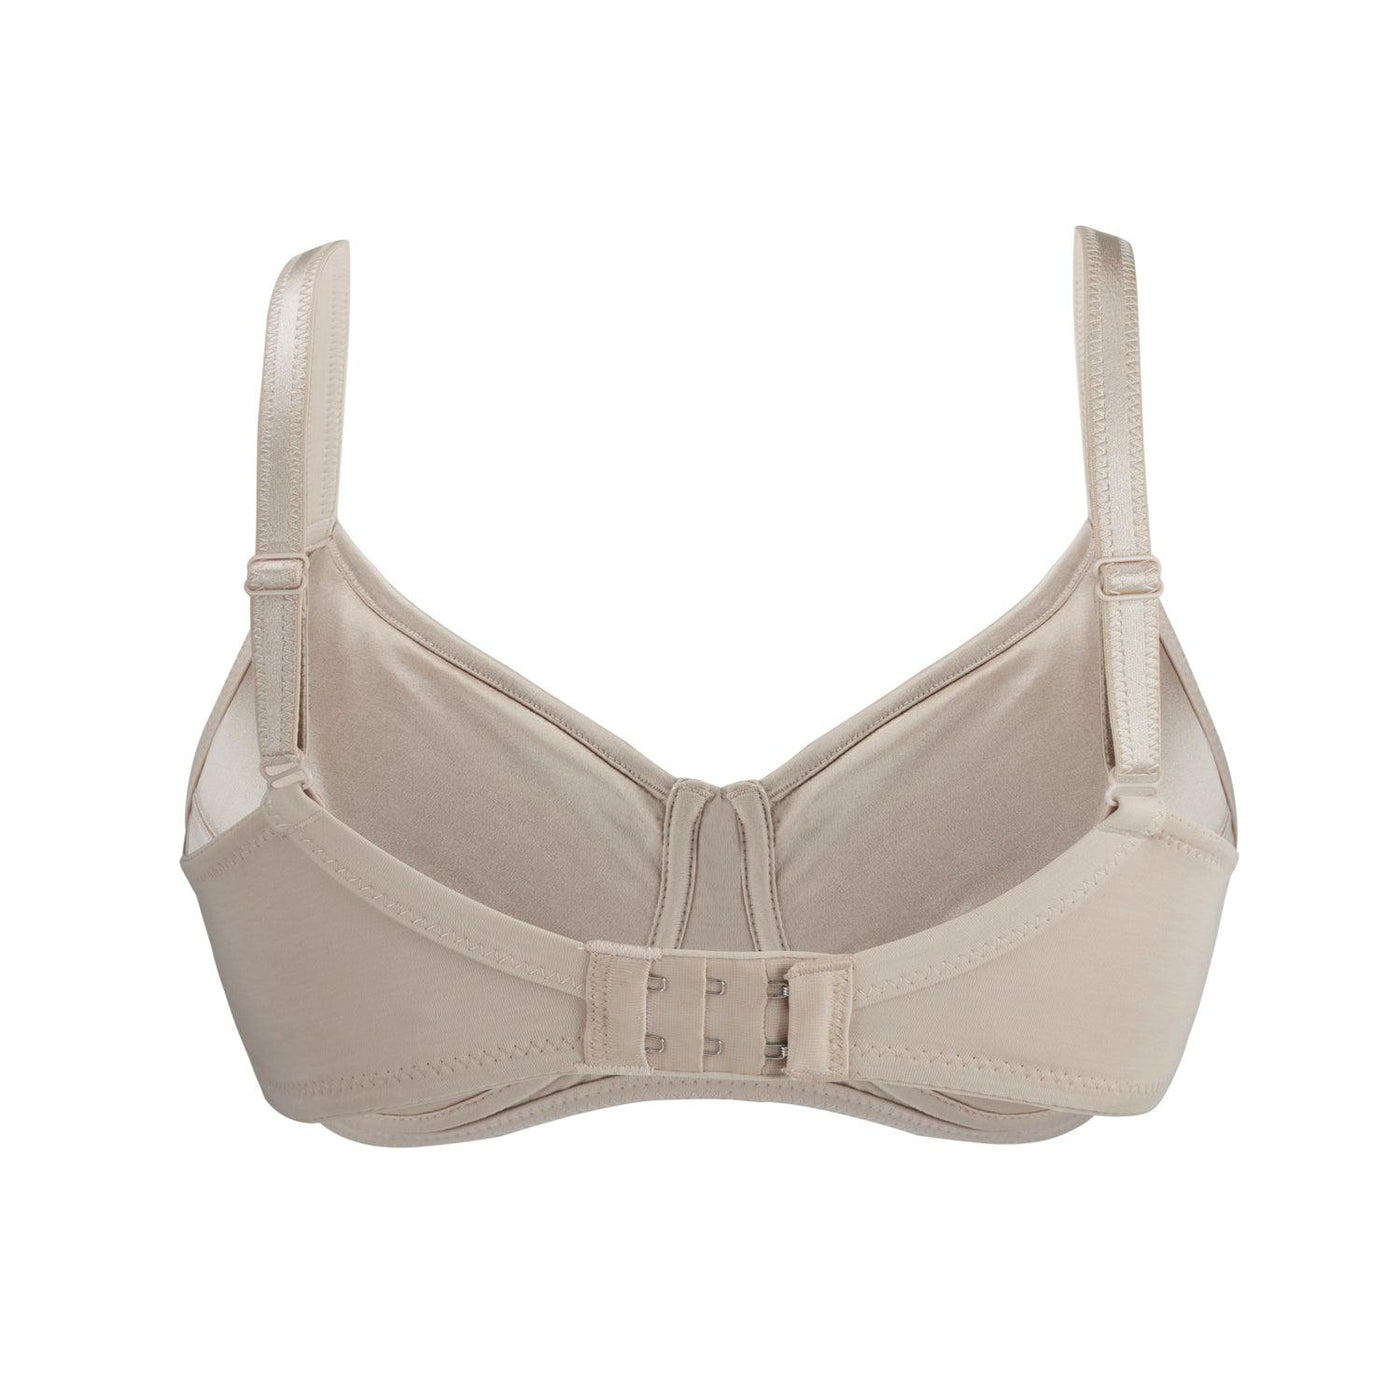 Ivory-Supportive Non-Wired Silk & Organic Cotton Full Cup Bra with removable paddings - Juliemay Lingerie